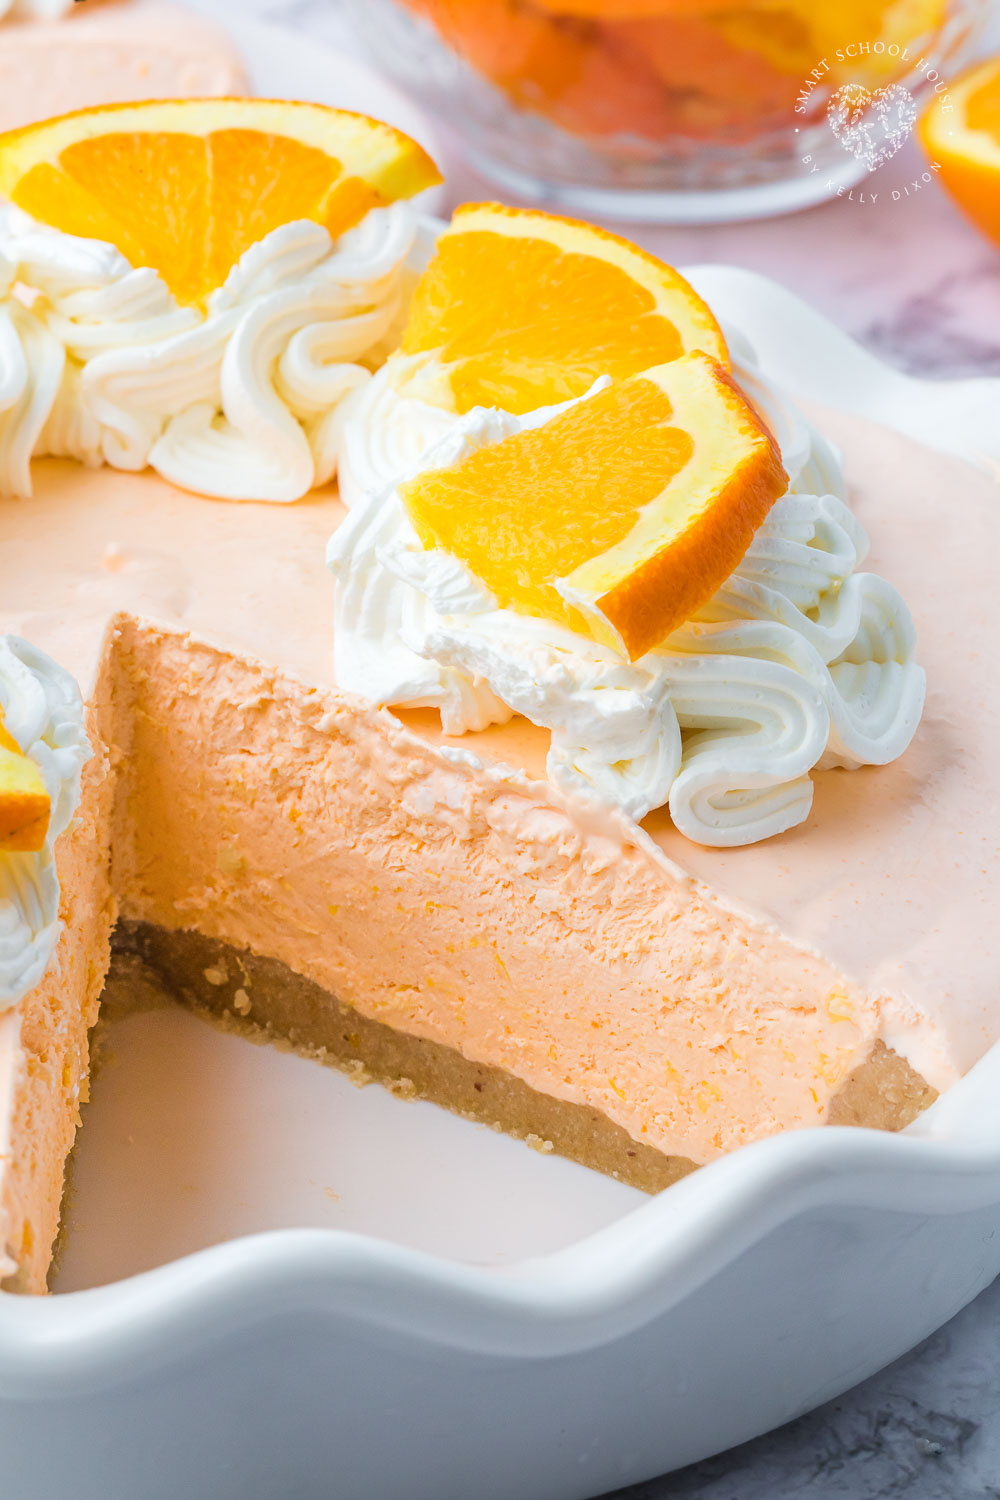 An Orange Jello Creamsicle Pie is an orange popsicle with an irresistible creaminess, all in a cookie pie crust. It screams hot summer days and ice cream trucks! 